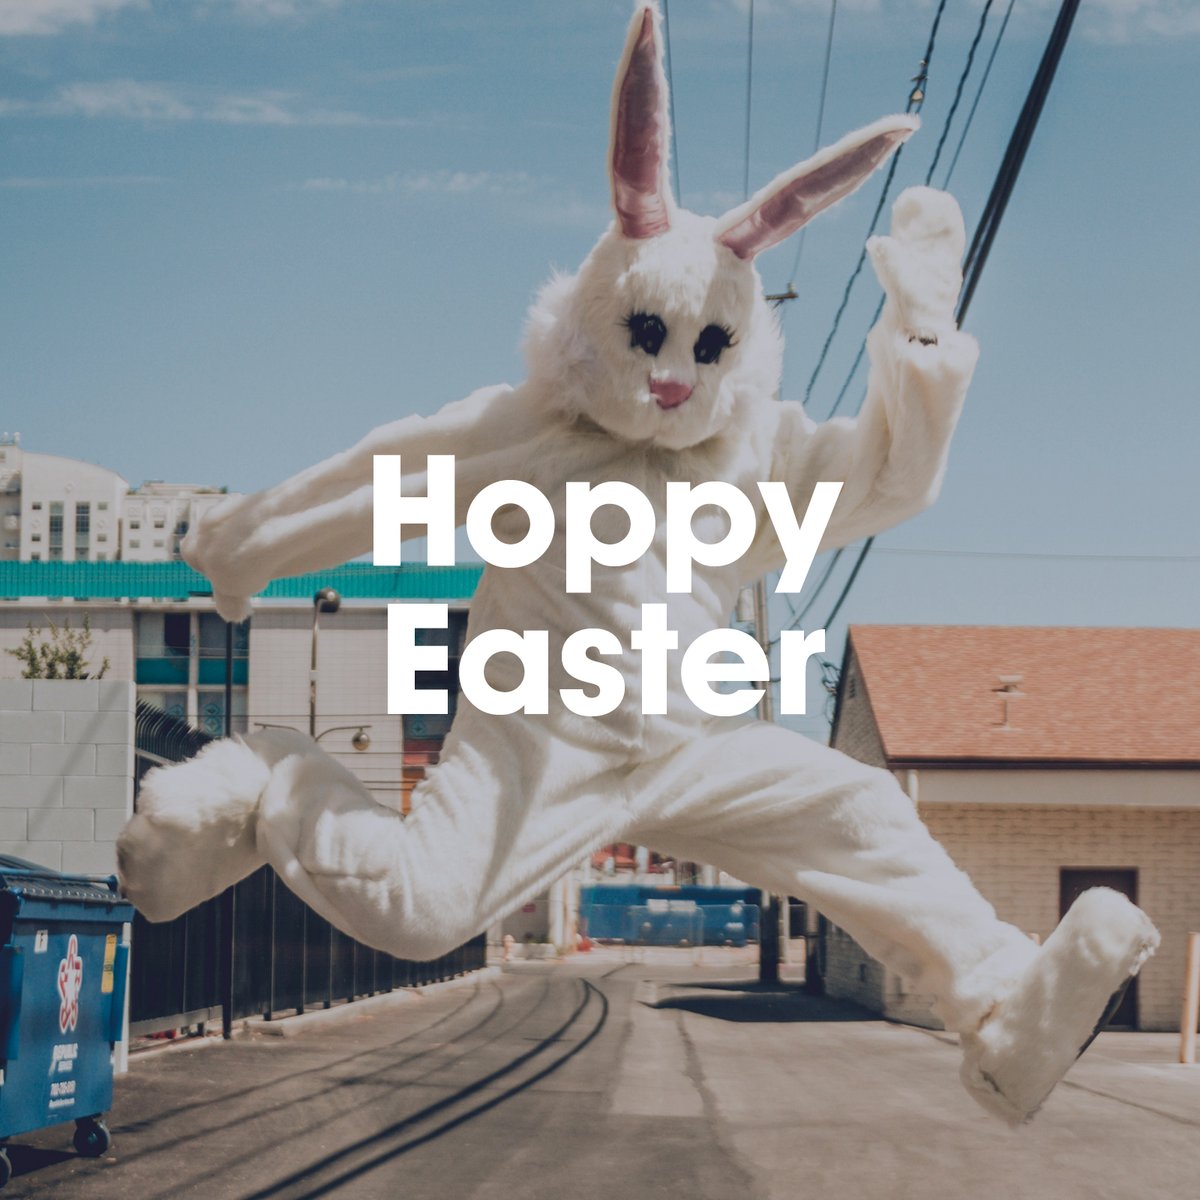 Happy Easter from the Confetti Team 🐰